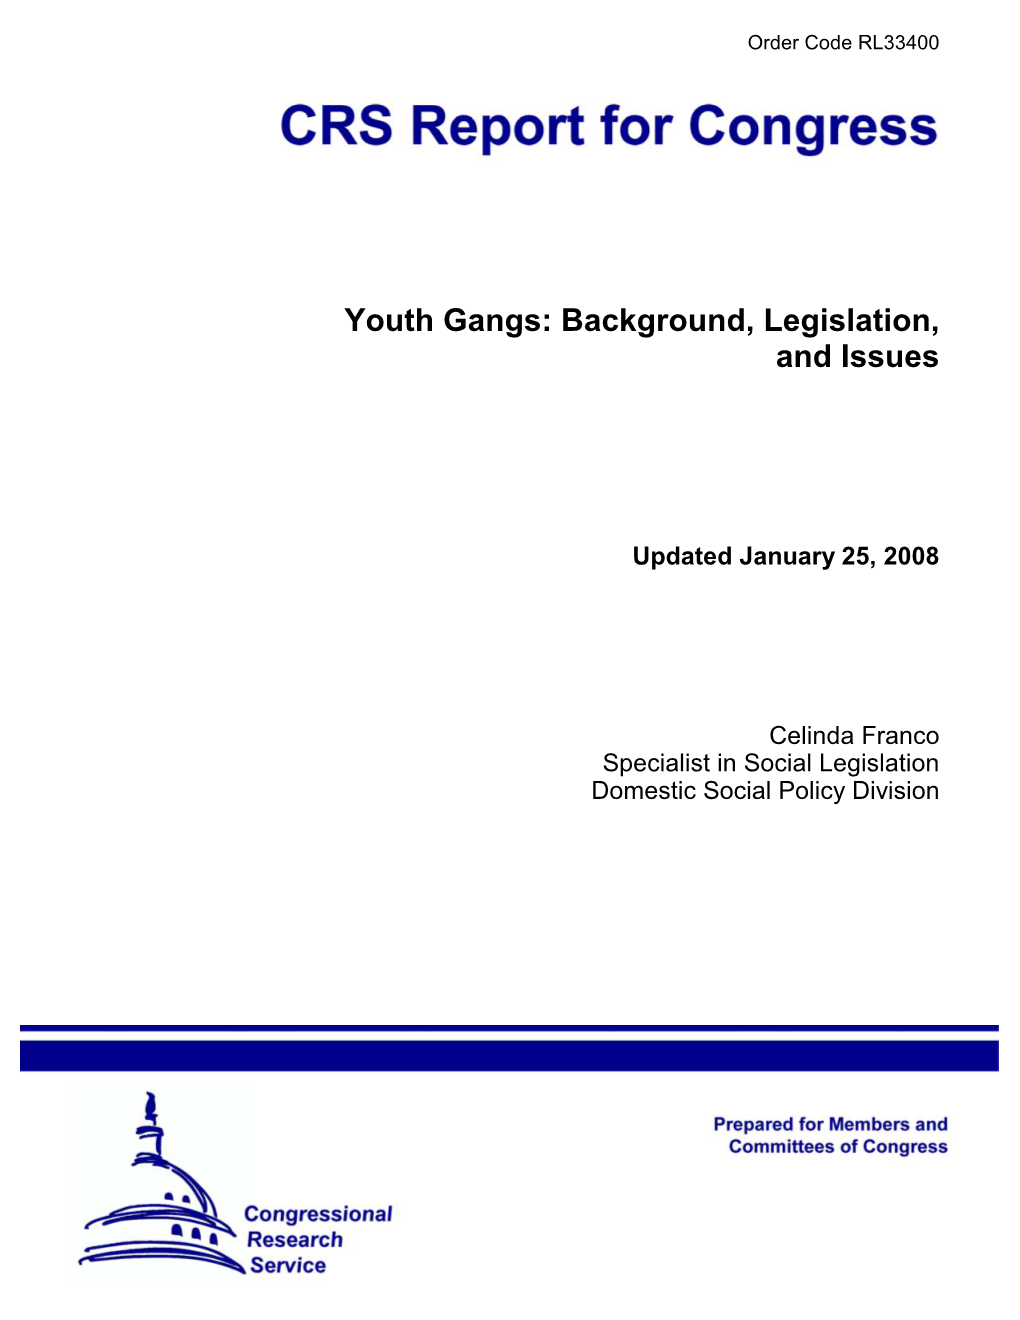 Youth Gangs: Background, Legislation, and Issues